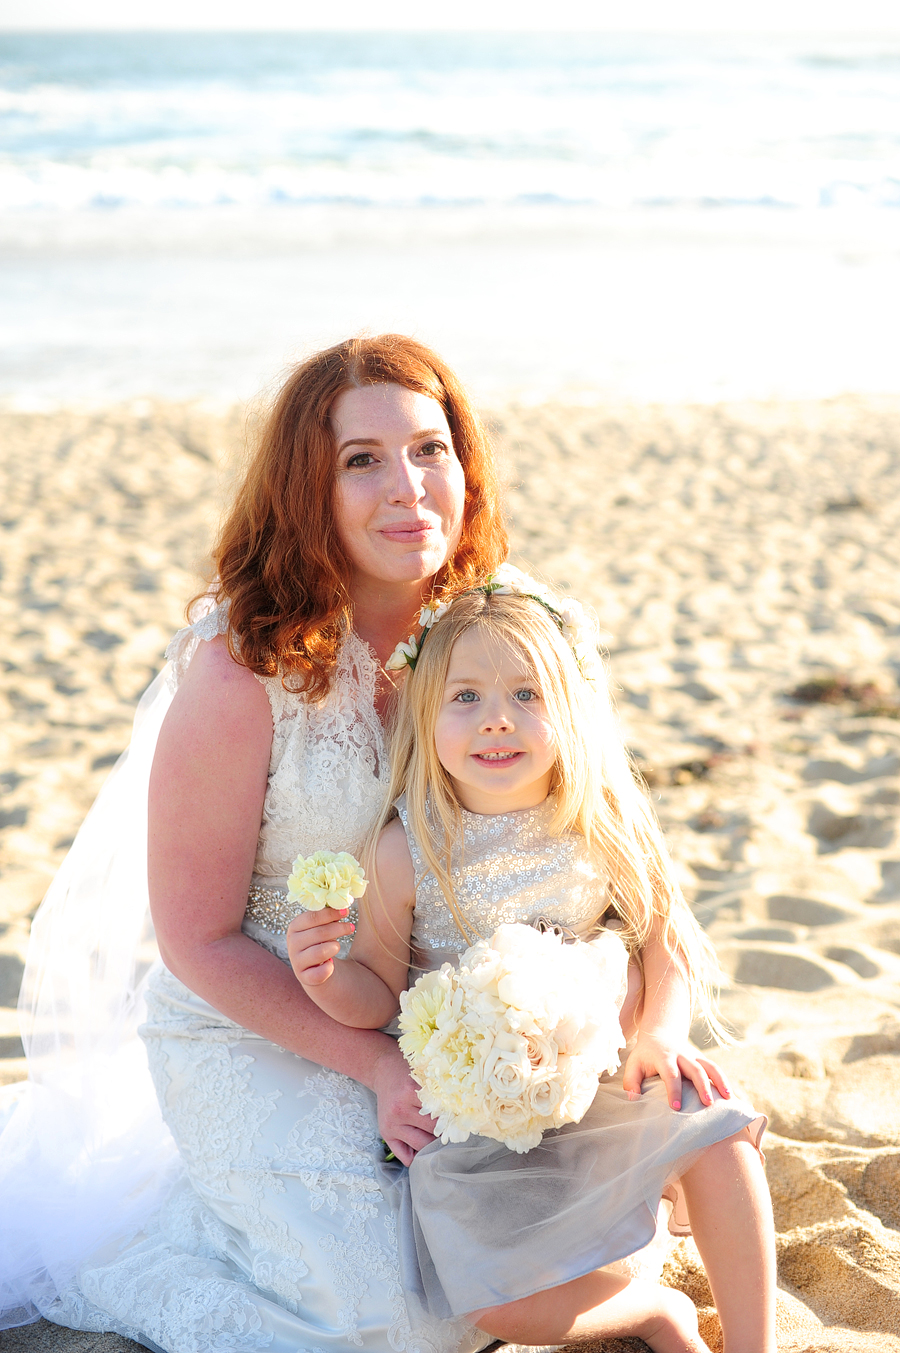 a redhead bride and her blonde daughter on the beach